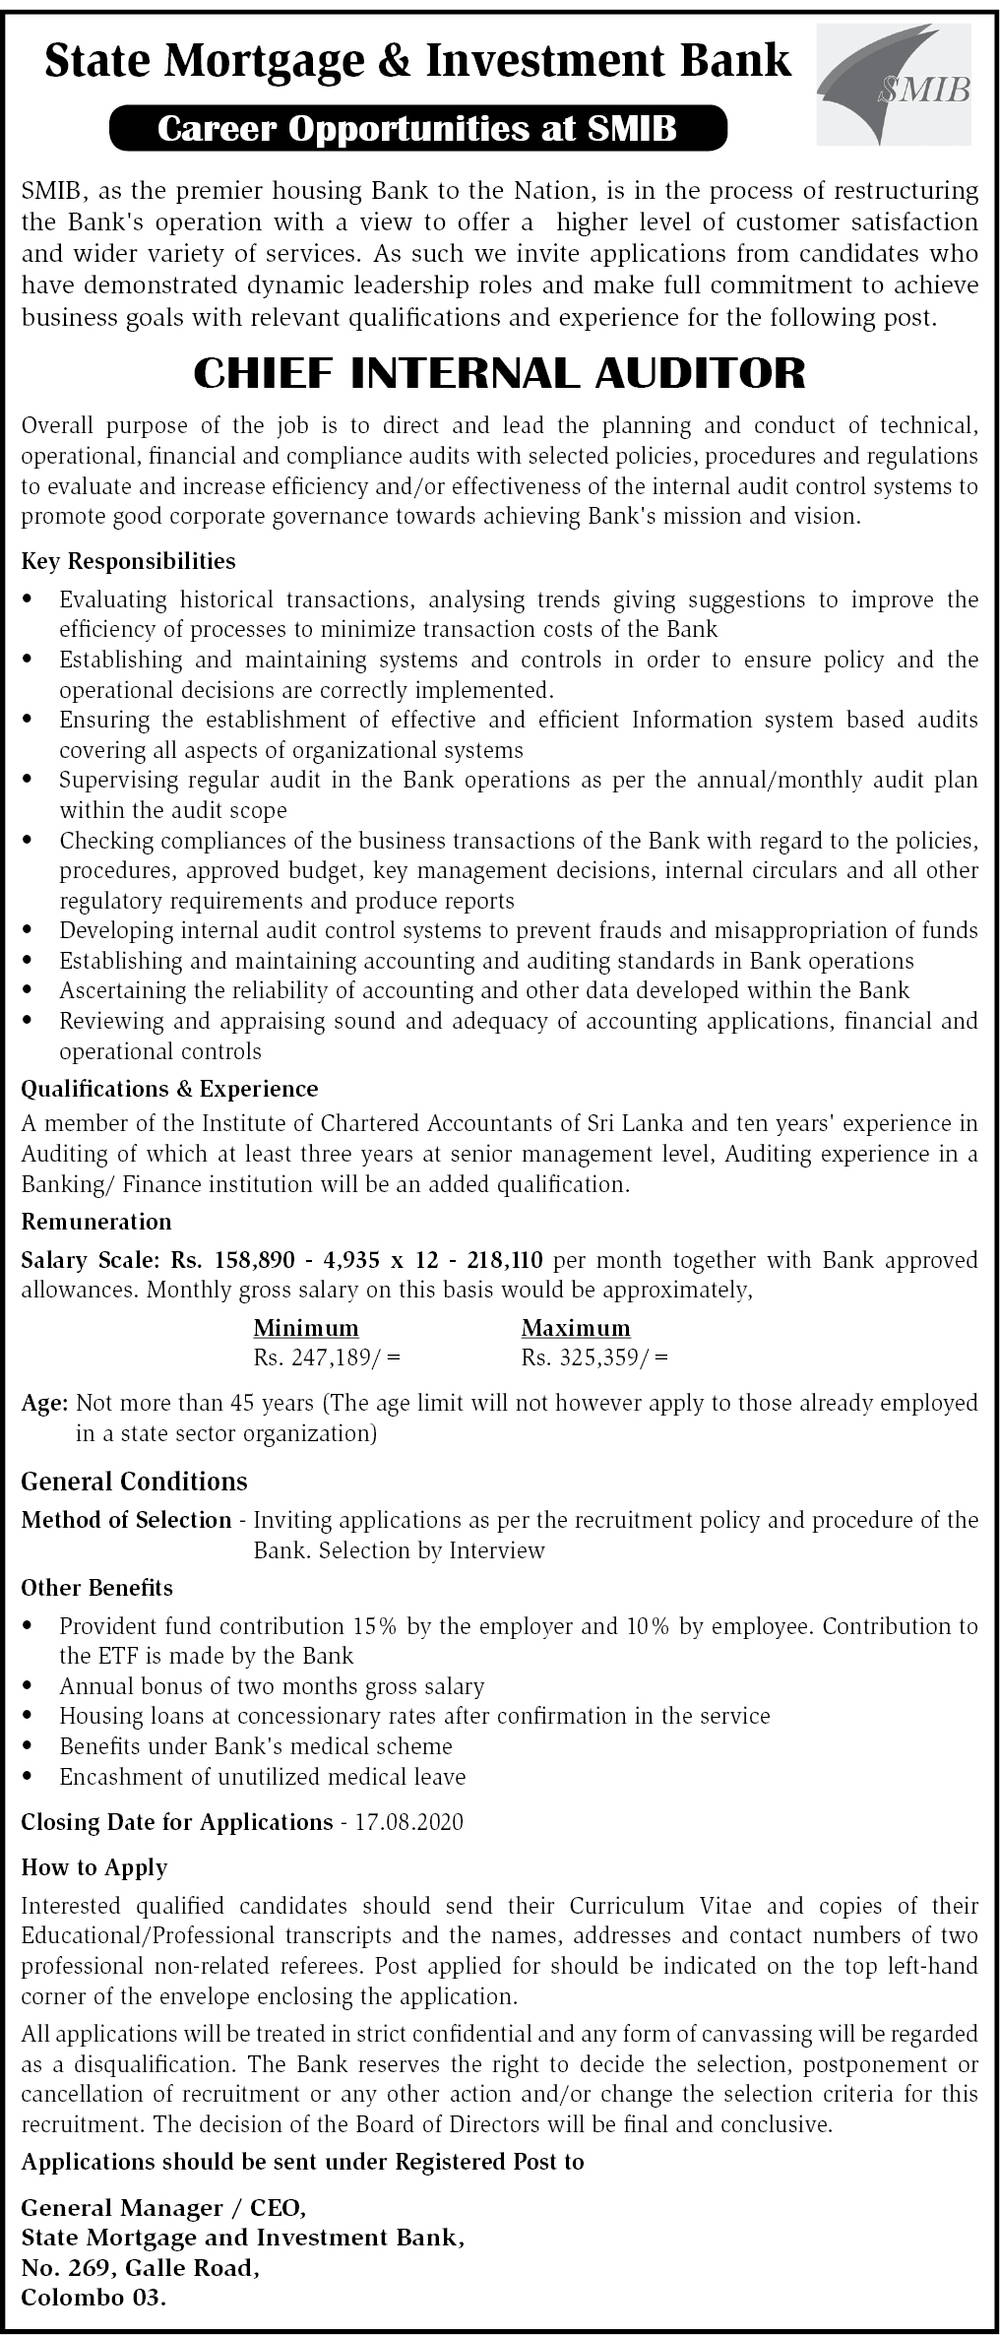 Chief Internal Auditor – State Mortgage and Investment Bank